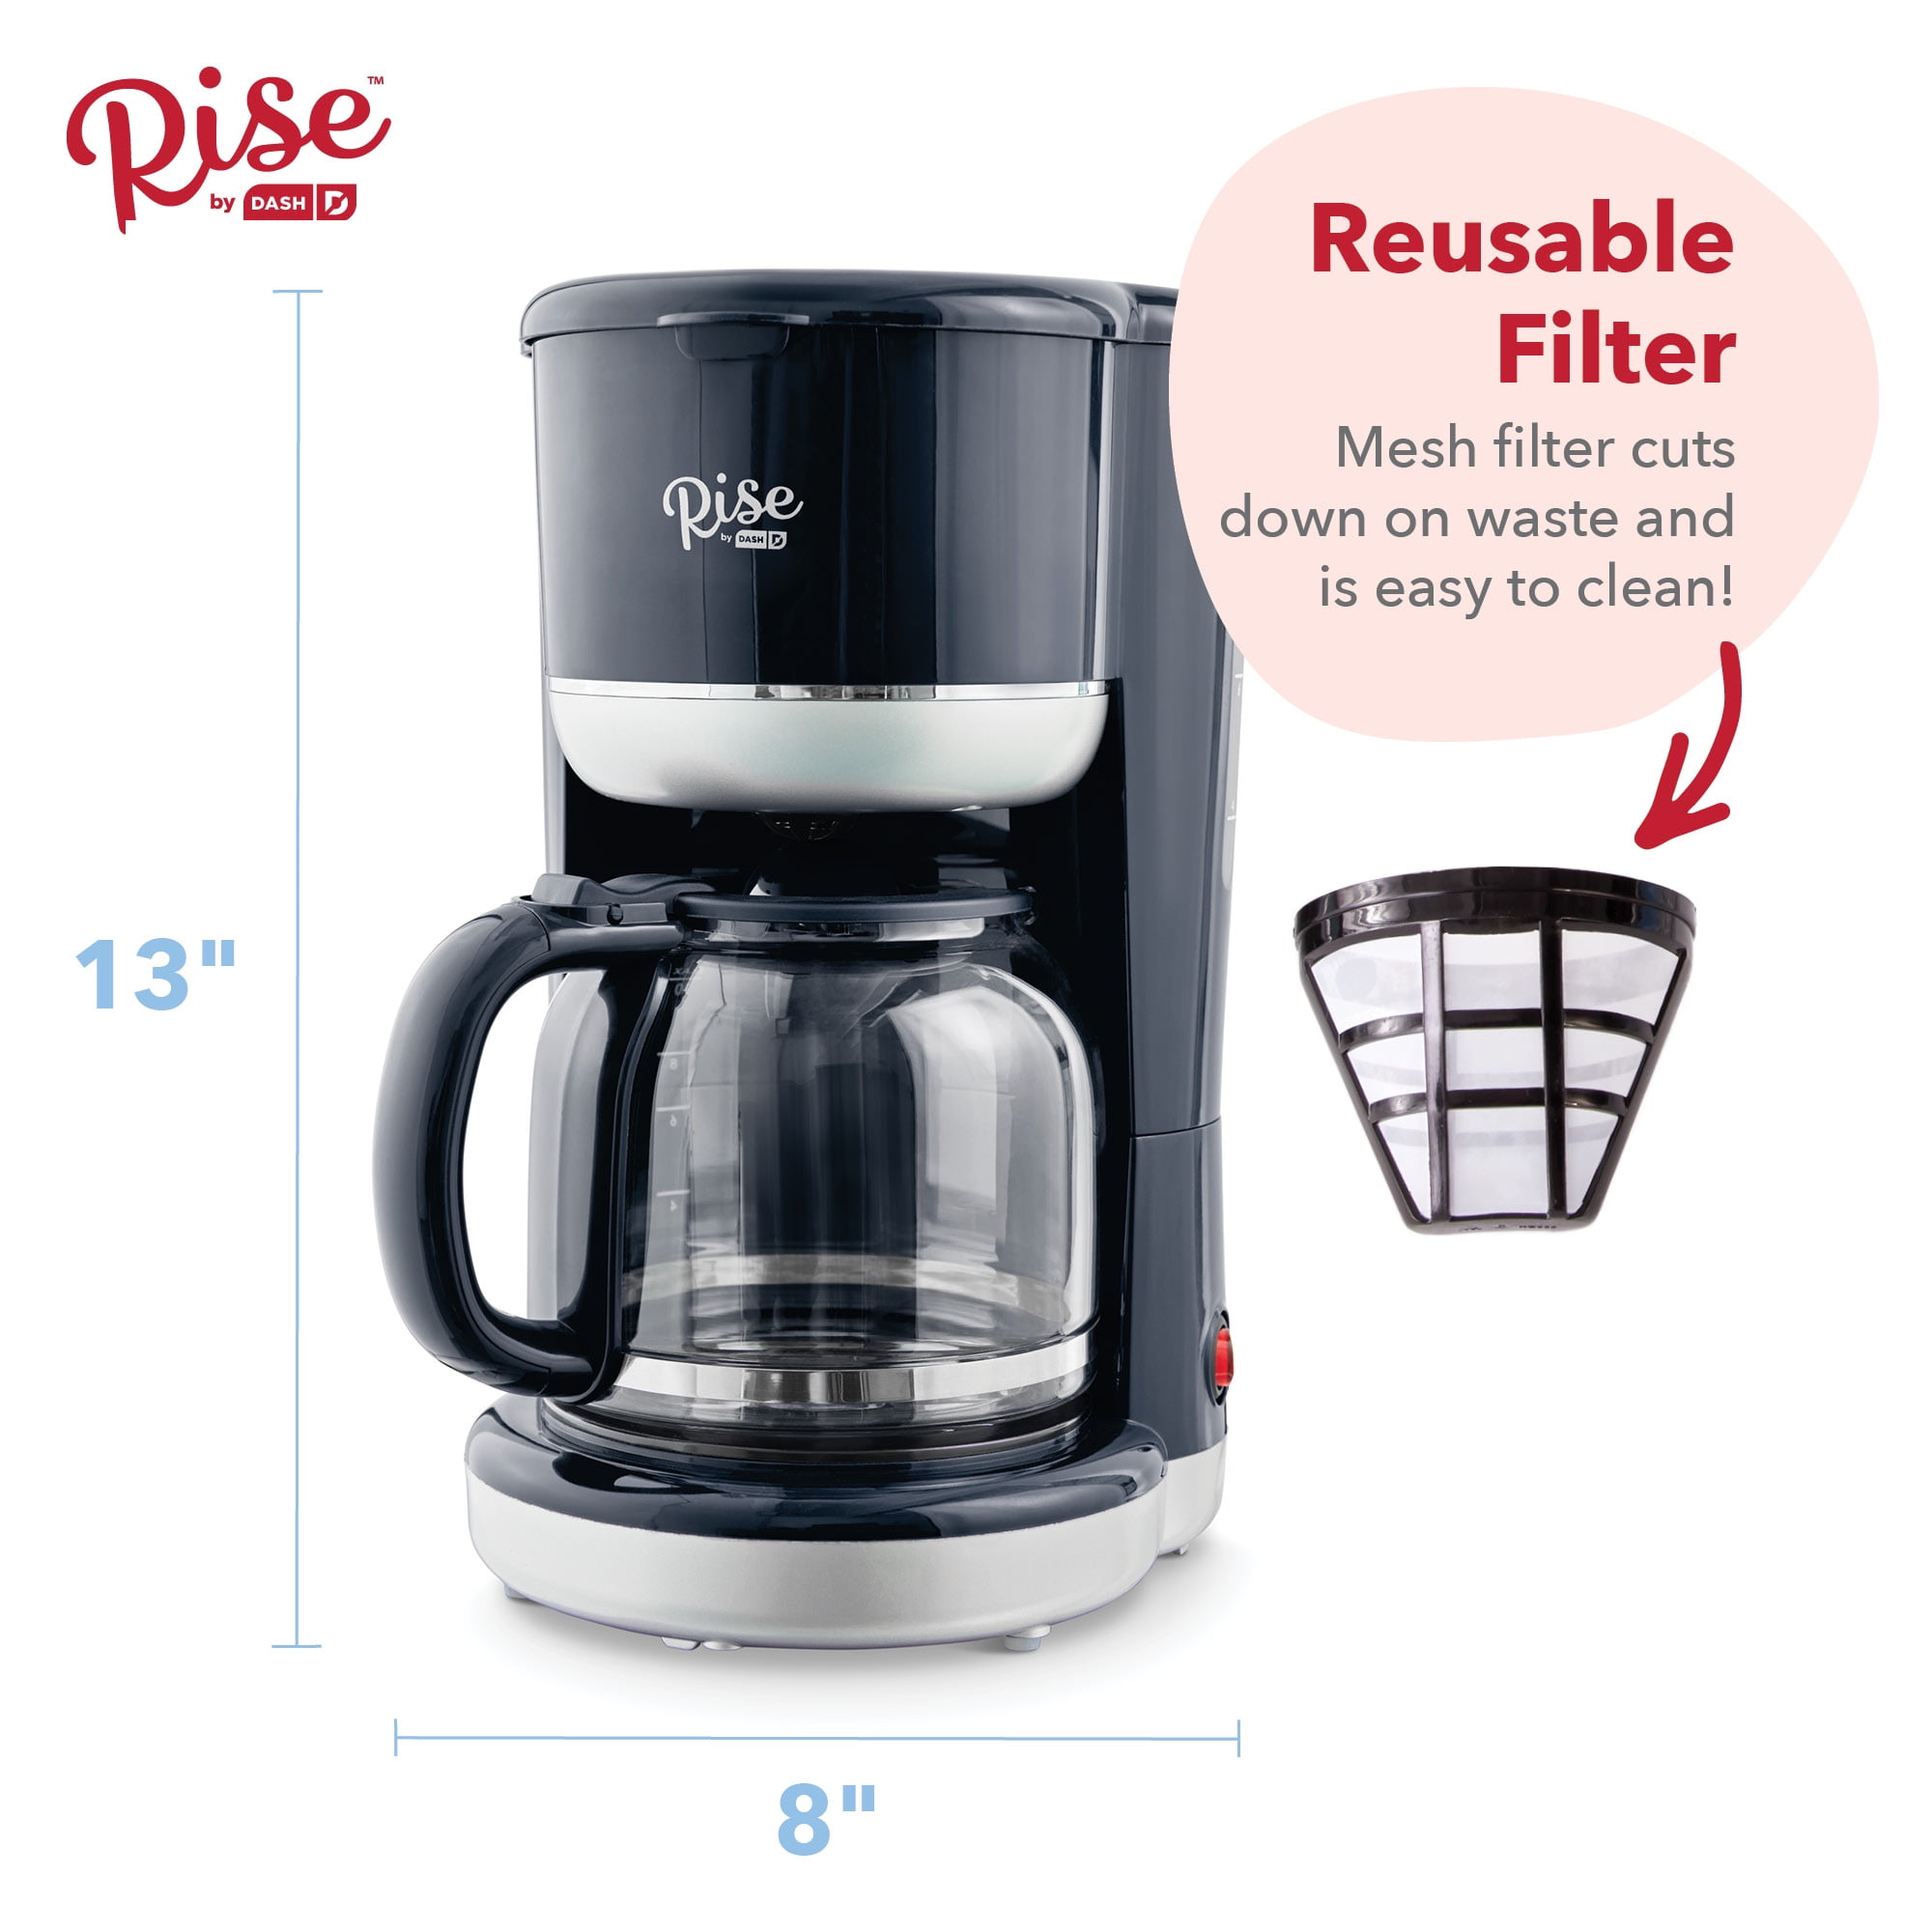 Breville 12 Cup Drip Filter Coffee Machine (10000 Loyalty Points) - Restock  PTY LTD